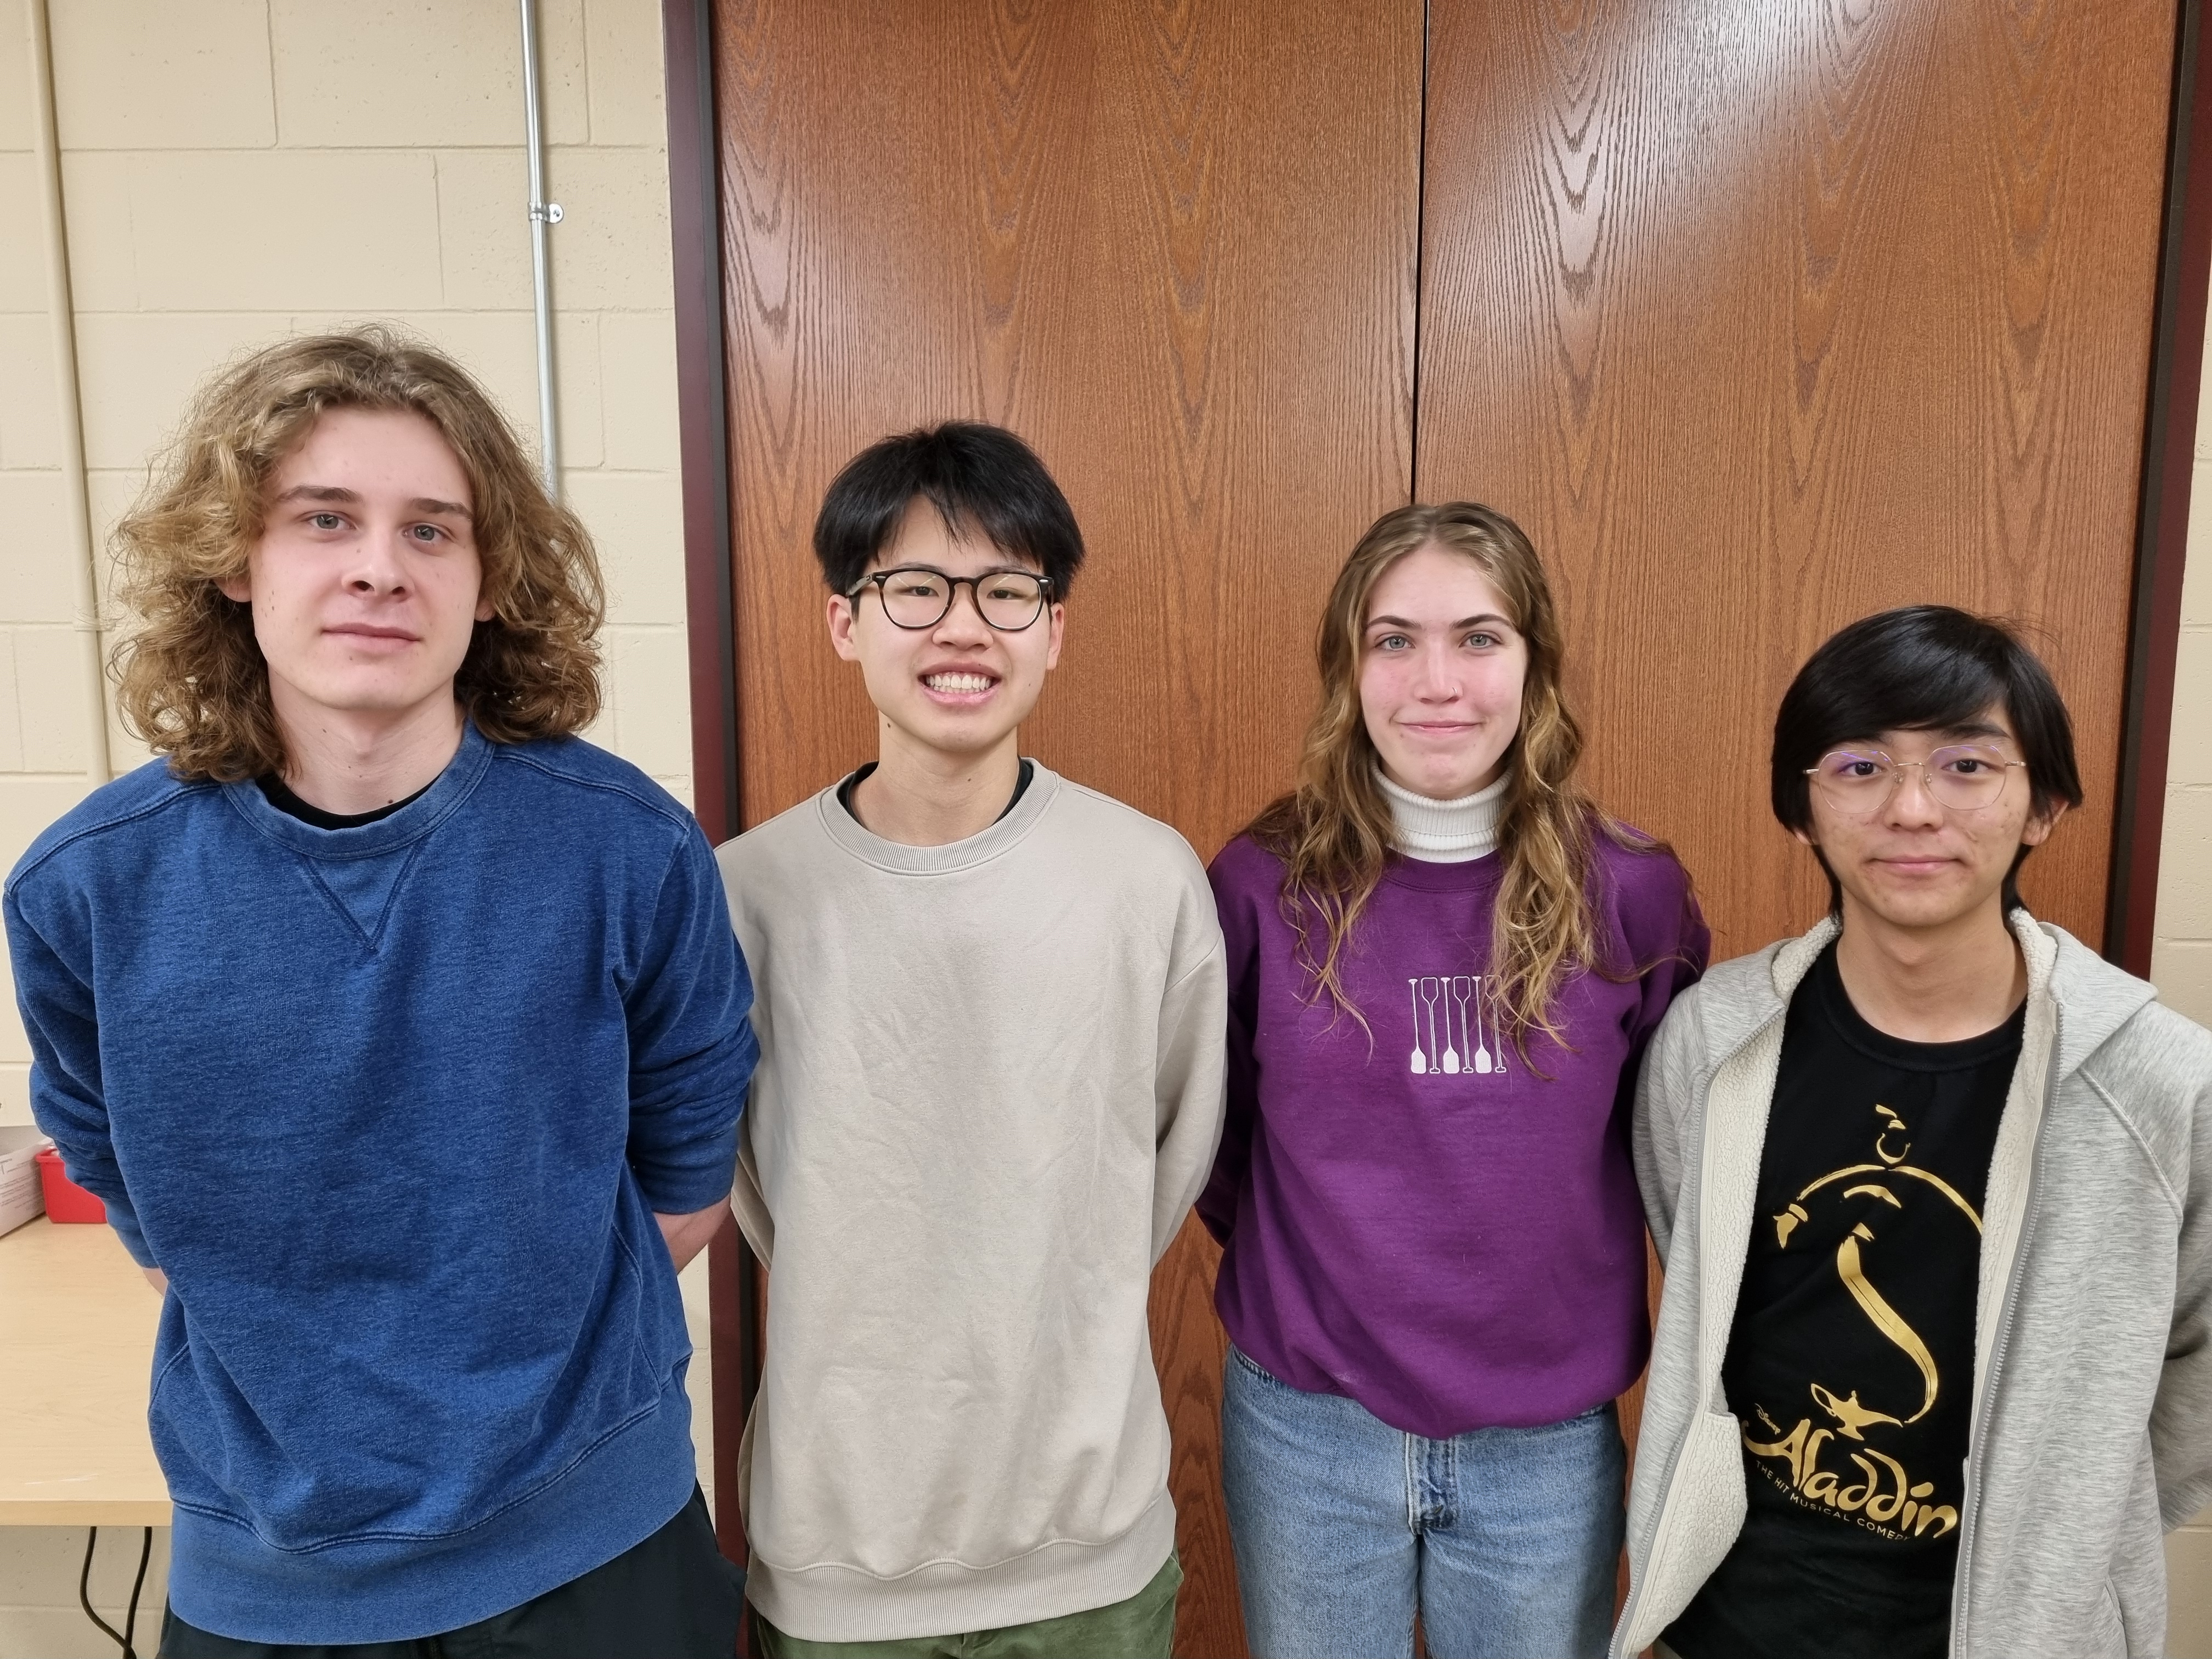 Group Picture: From Left to Right: Griffin Radtke (ME Team Leader), Jeffery Guo (BPAG), Sydney Therien (BME Team Leader & Communicator), Emilio Lim (BSAC & BWIG)  ,